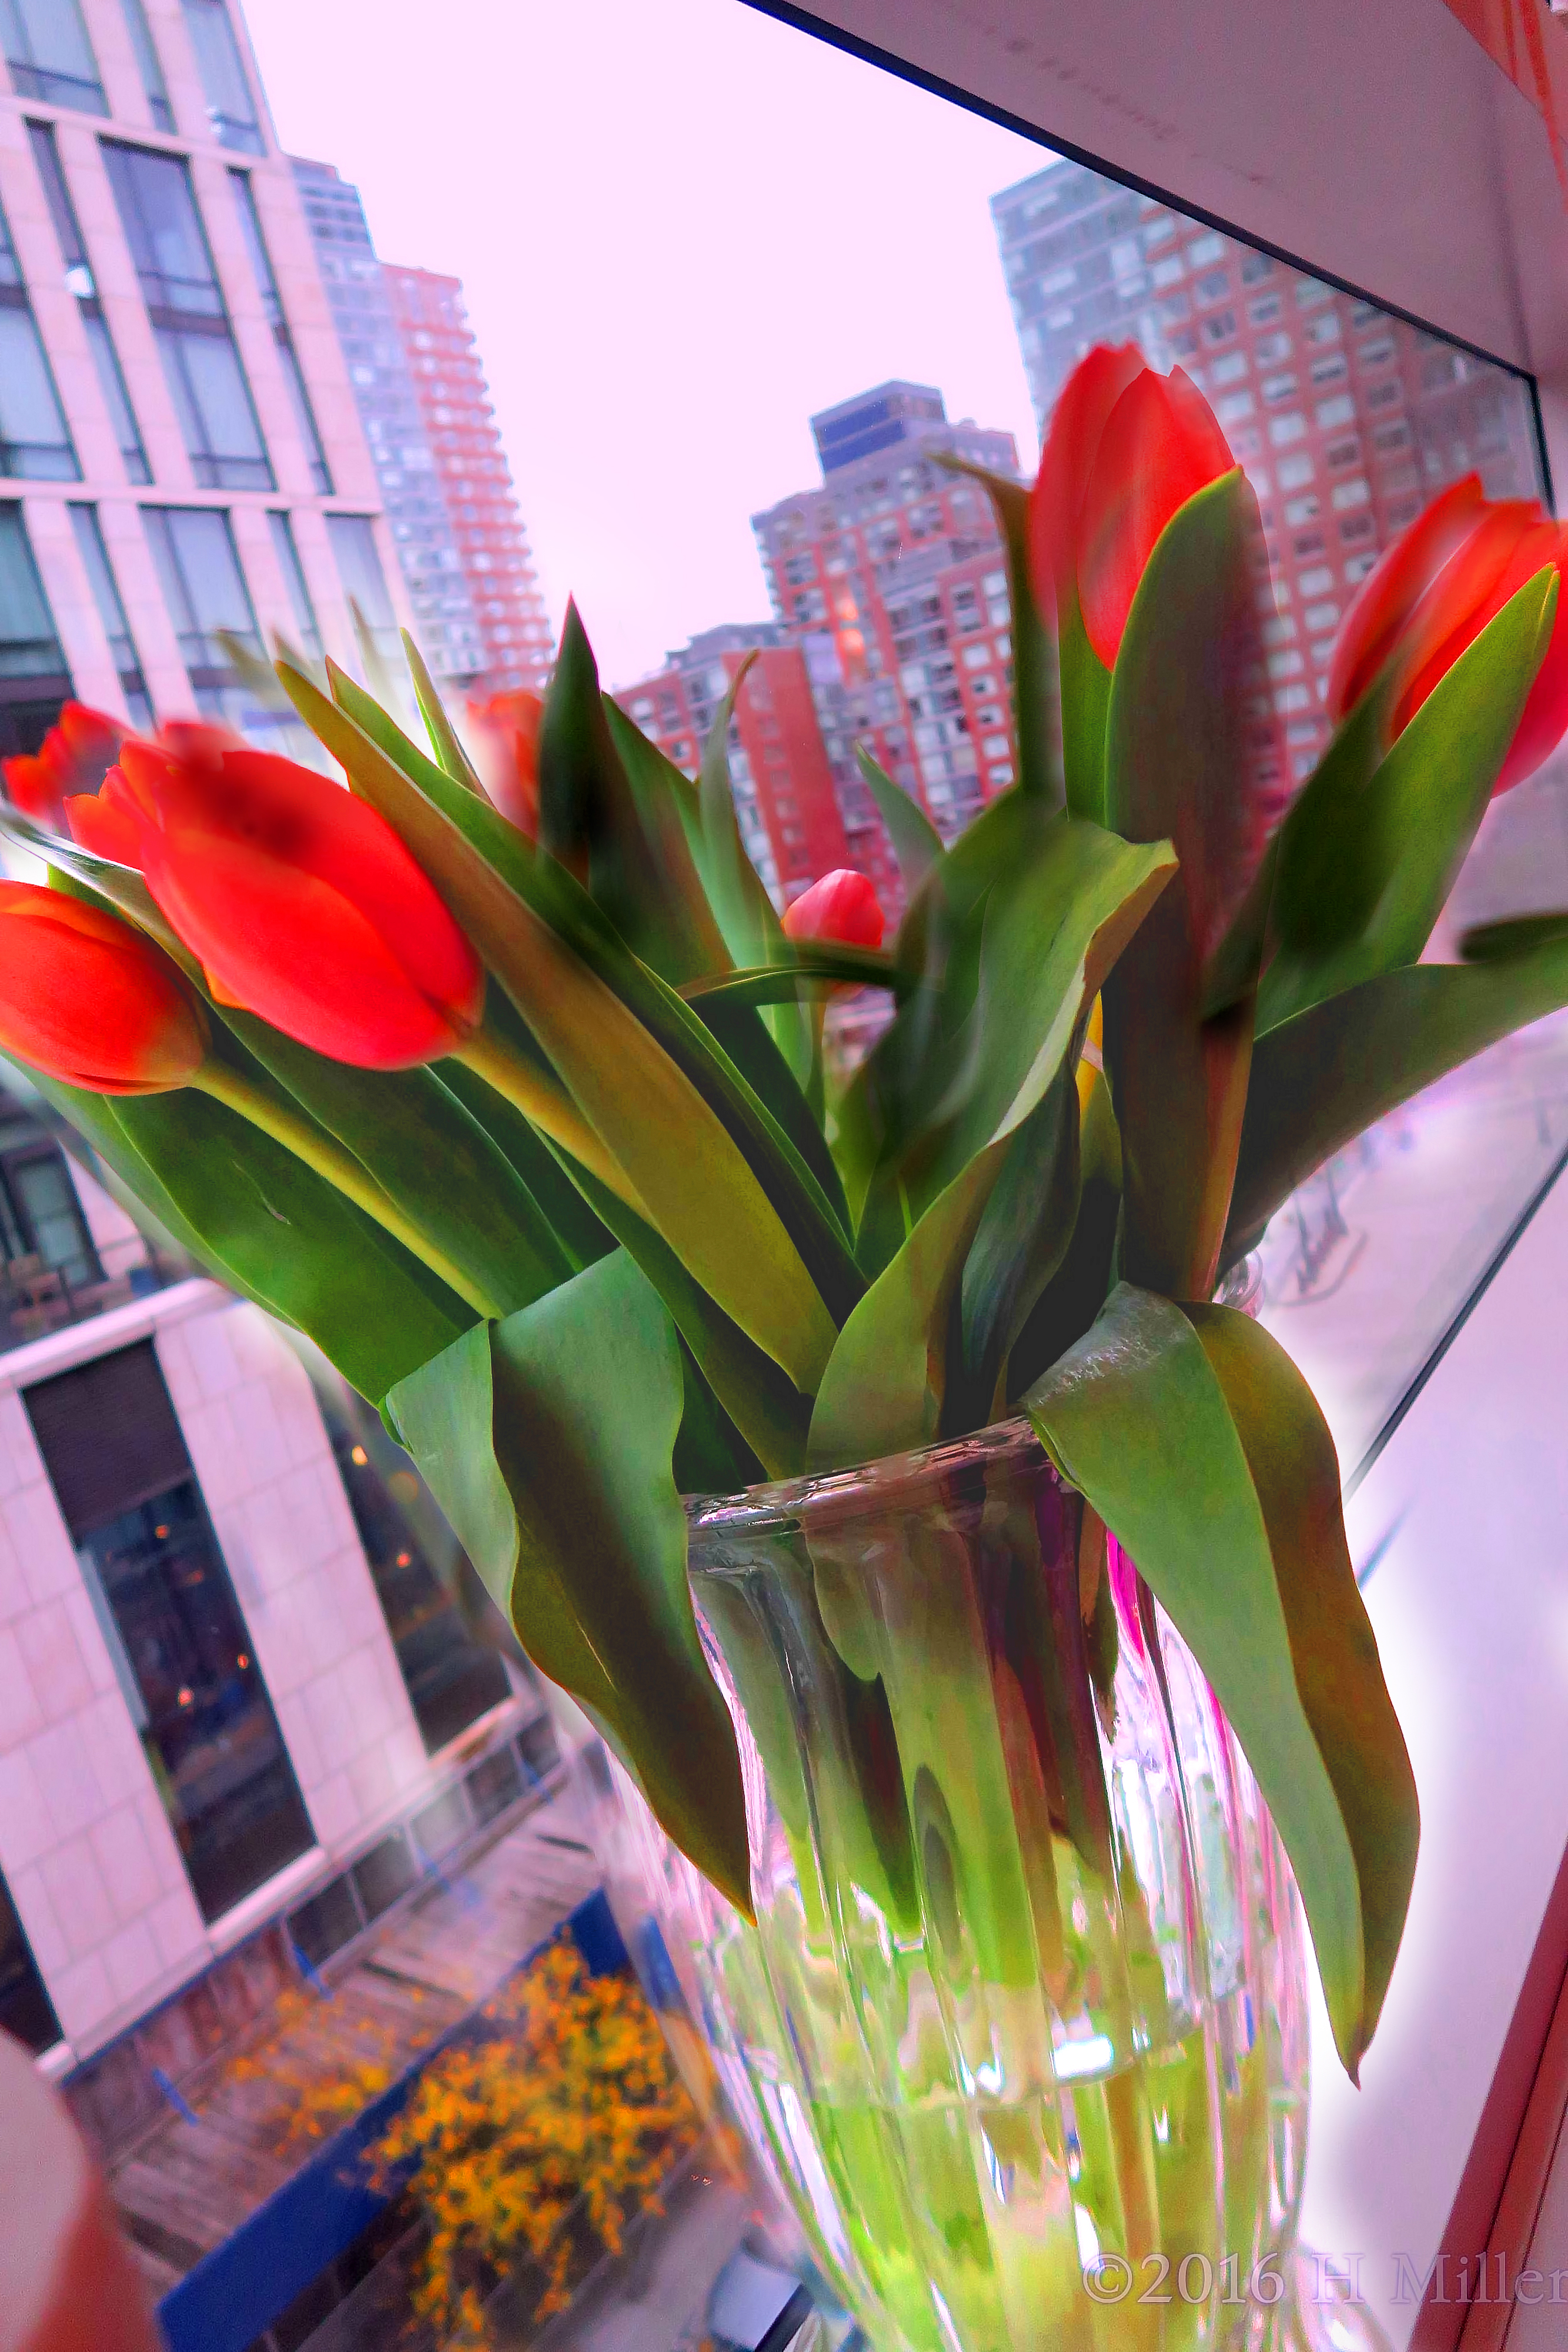 Birthday Flowers With A View Of The City. 